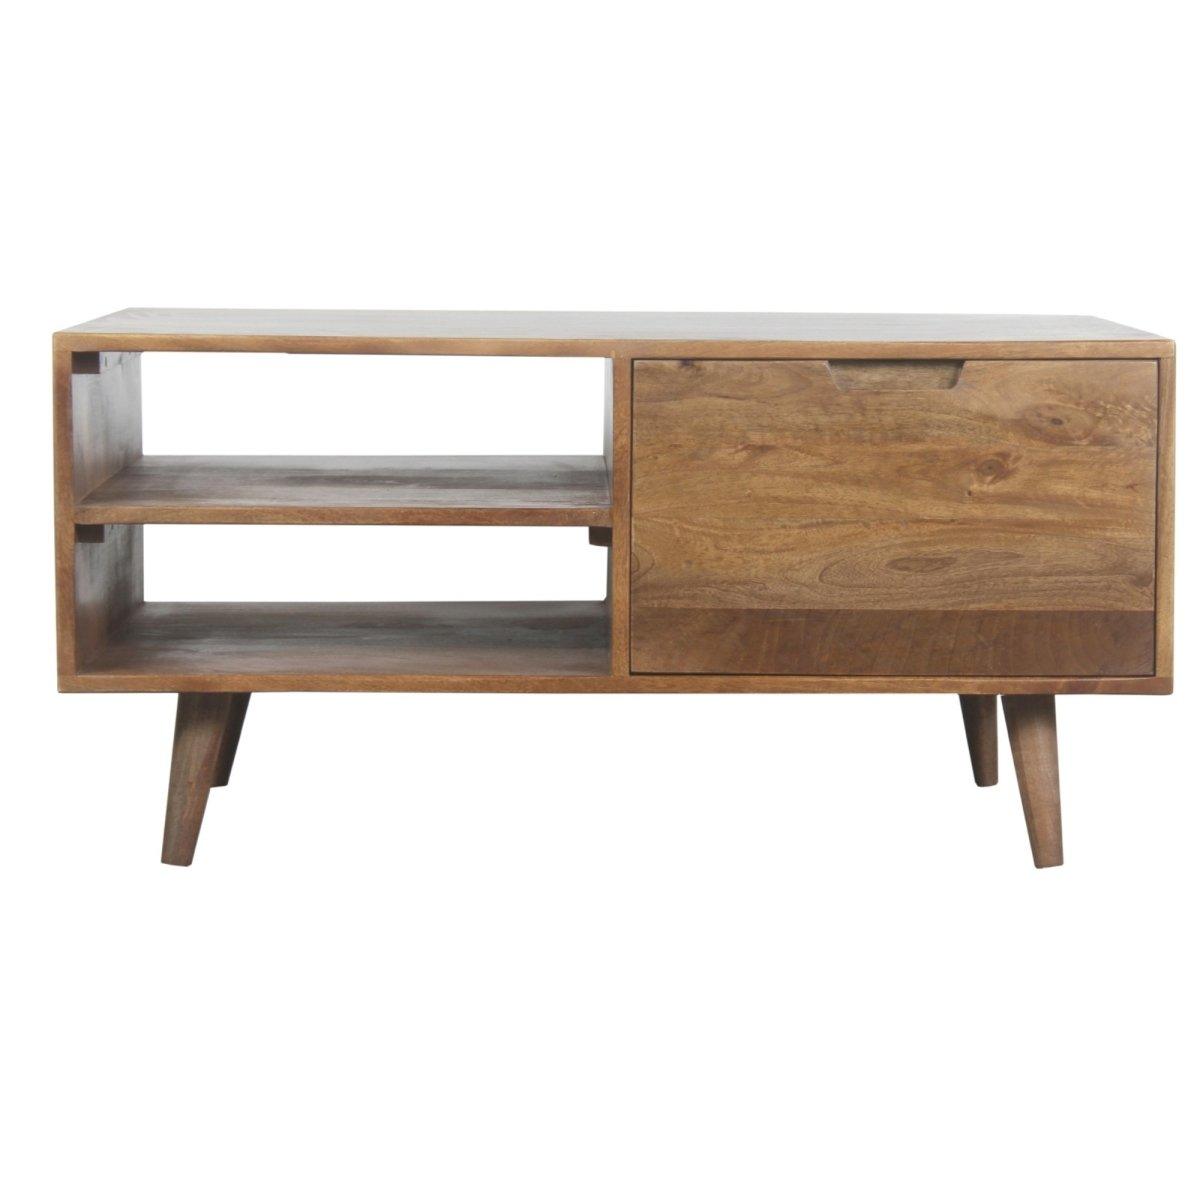 Mercury Mango Wood Coffee Table - Rustic Furniture Outlet